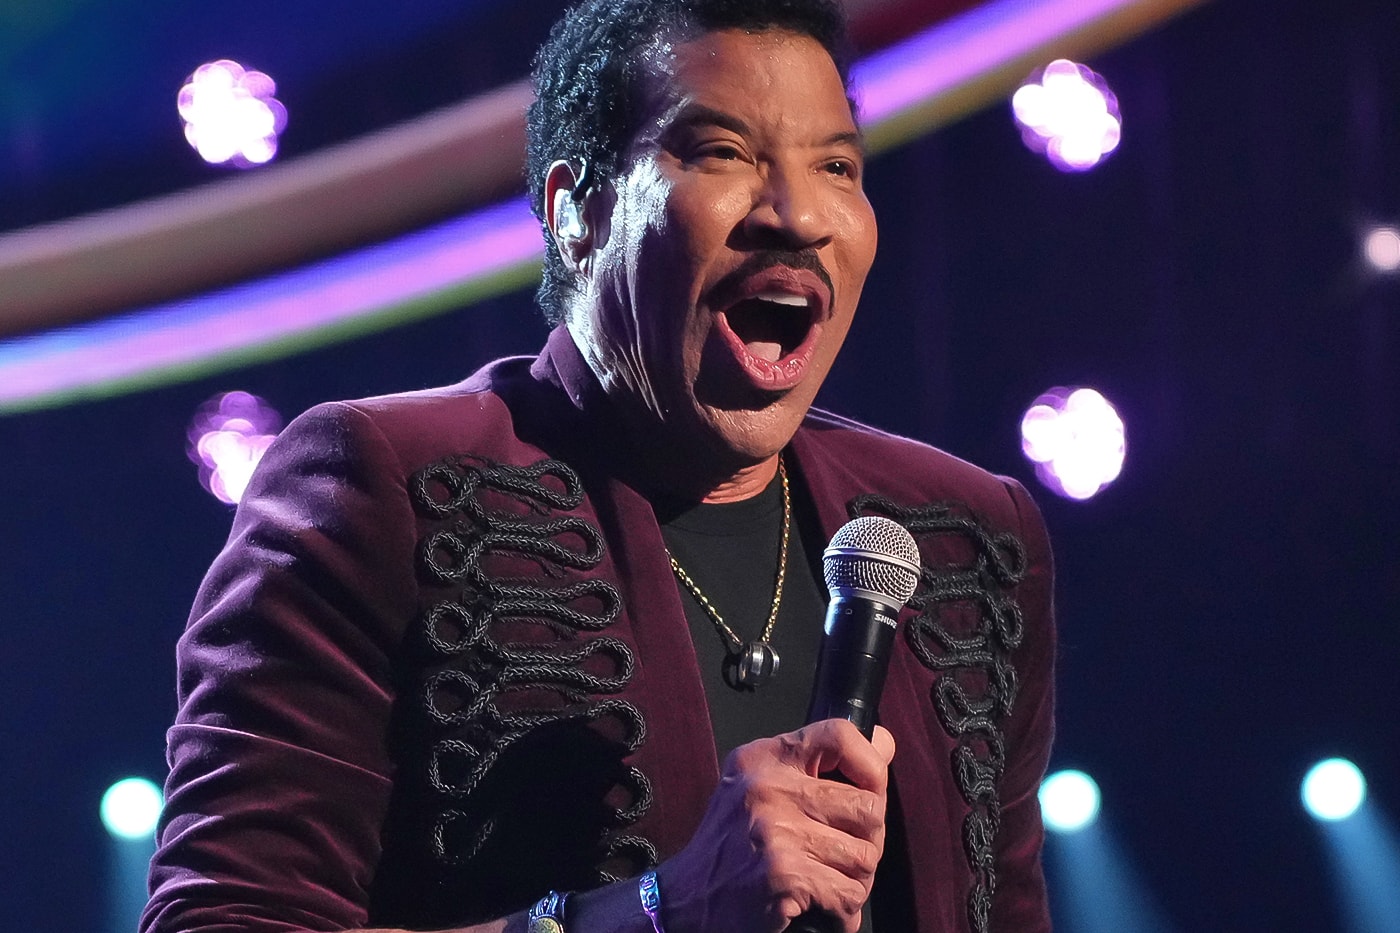 Lionel Richie To Accept Icon Award at 2022 American Music Awards